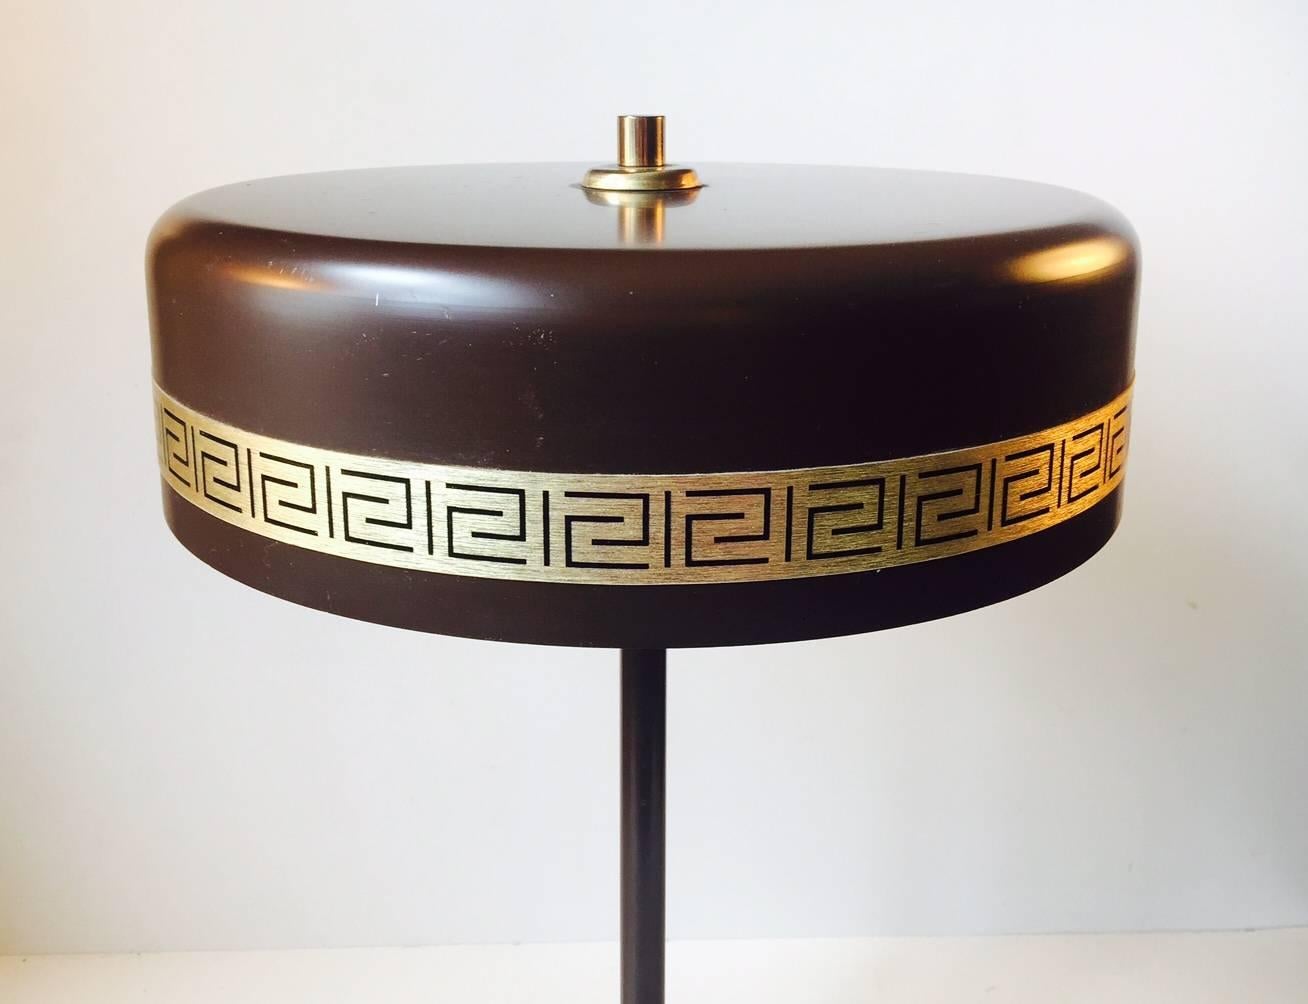 Rare desk lamp designed and manufactured by Vitrika in Denmark during the 1960s. It is model number 40304 and is called 'Chief'. Features brass detailing and hidden switch.